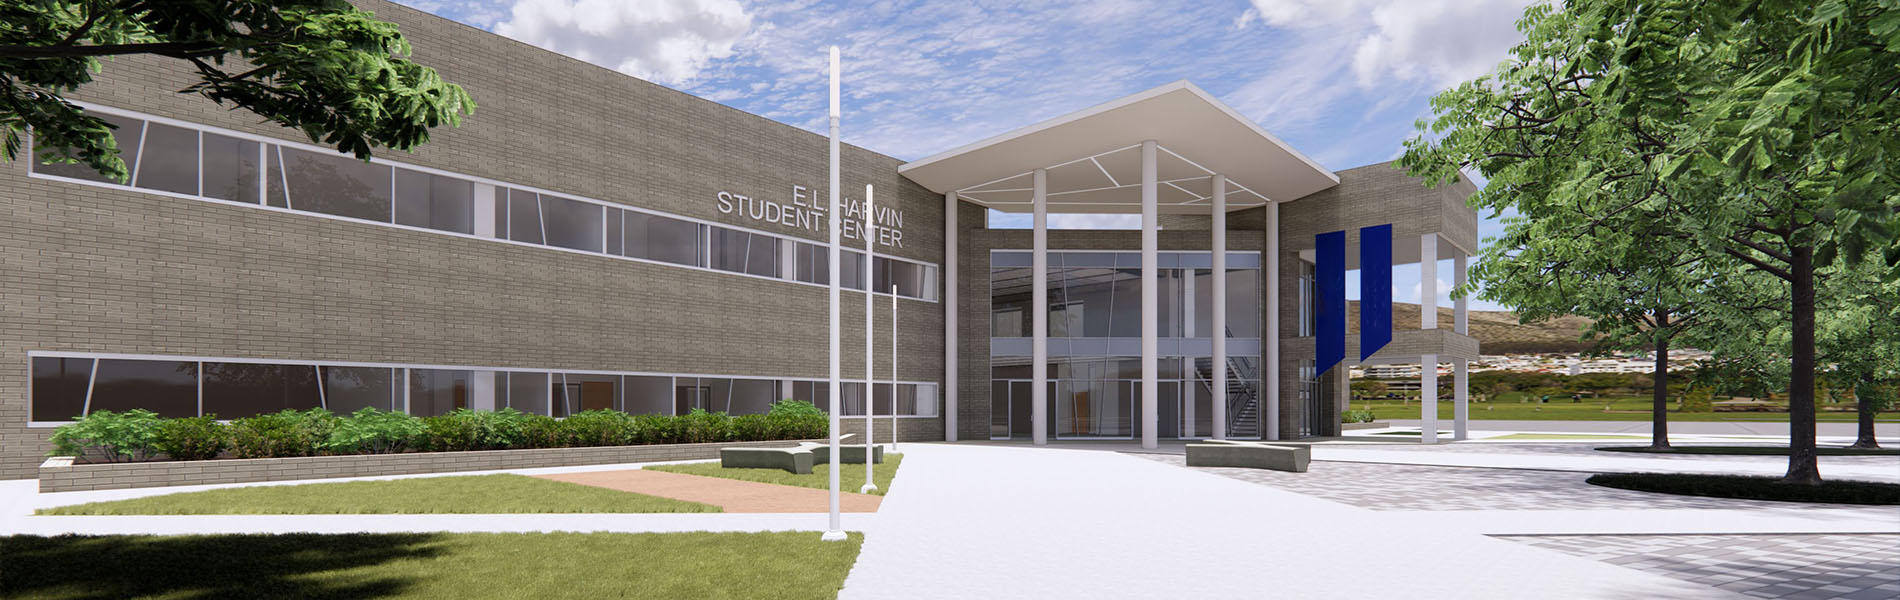 Architect's rendering of the Harvin Student Center exterior